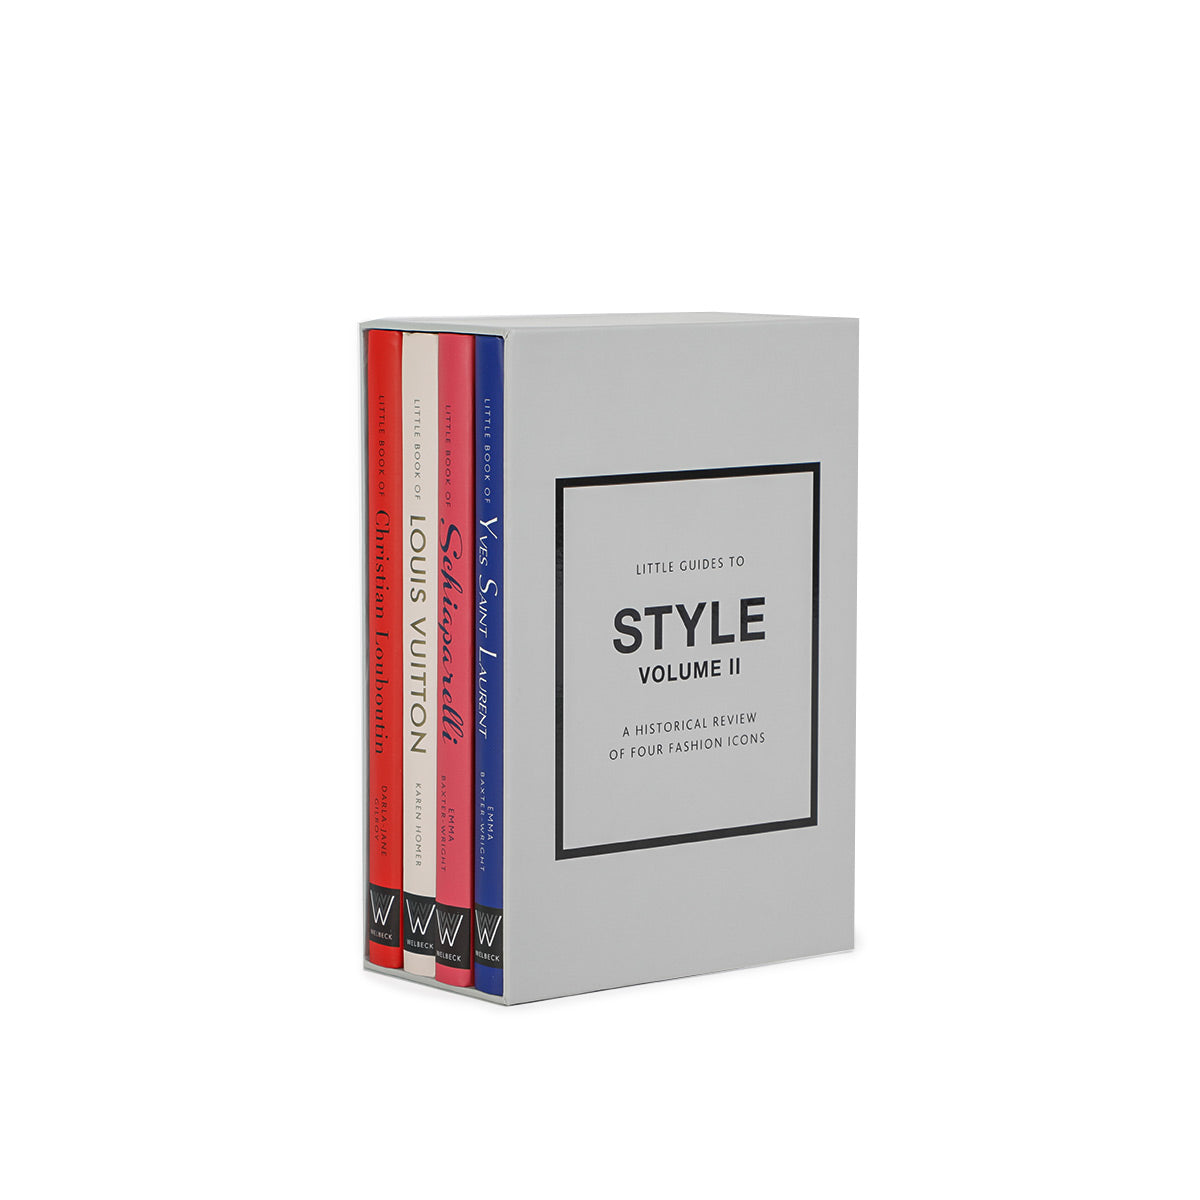 Buy Little Guides To Style Vol Ii Book online in India